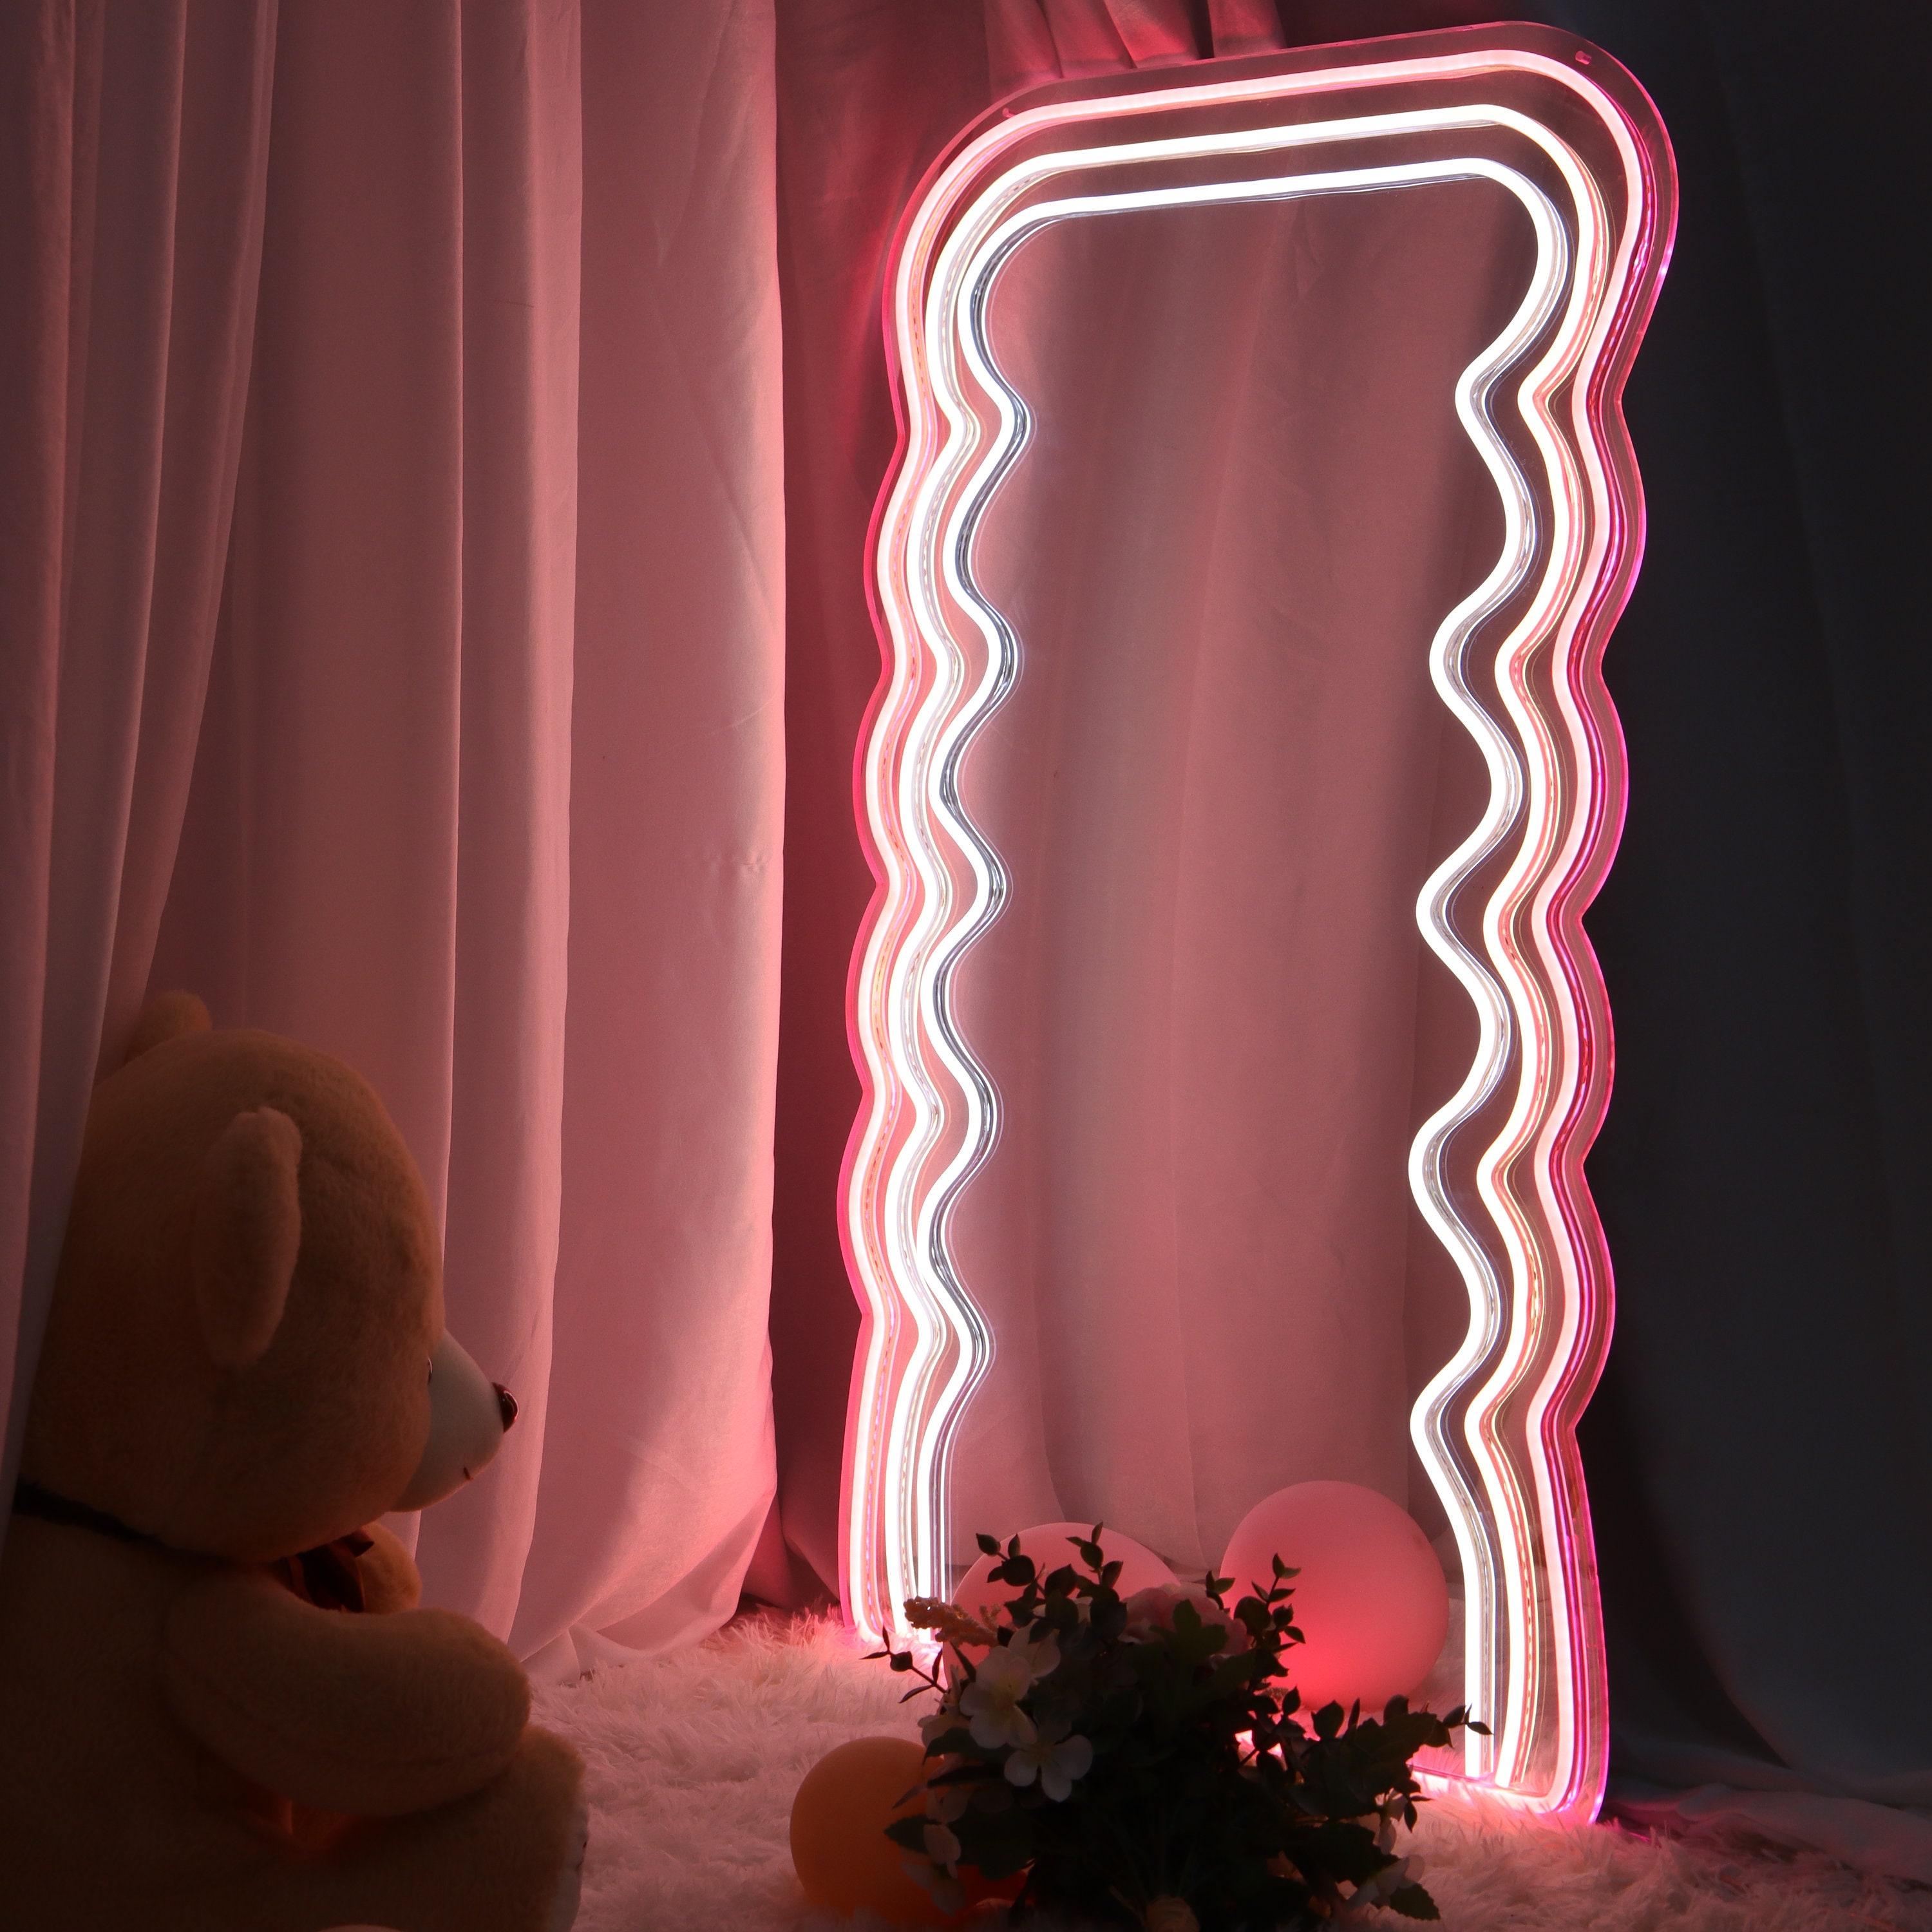 Wavy Pink Neon Mirror, Glowing Art, Gifts Mirror Etsy Mirror Livingroom, Artistic for - Neon Personalized Sign,neon Led Wall Vintage